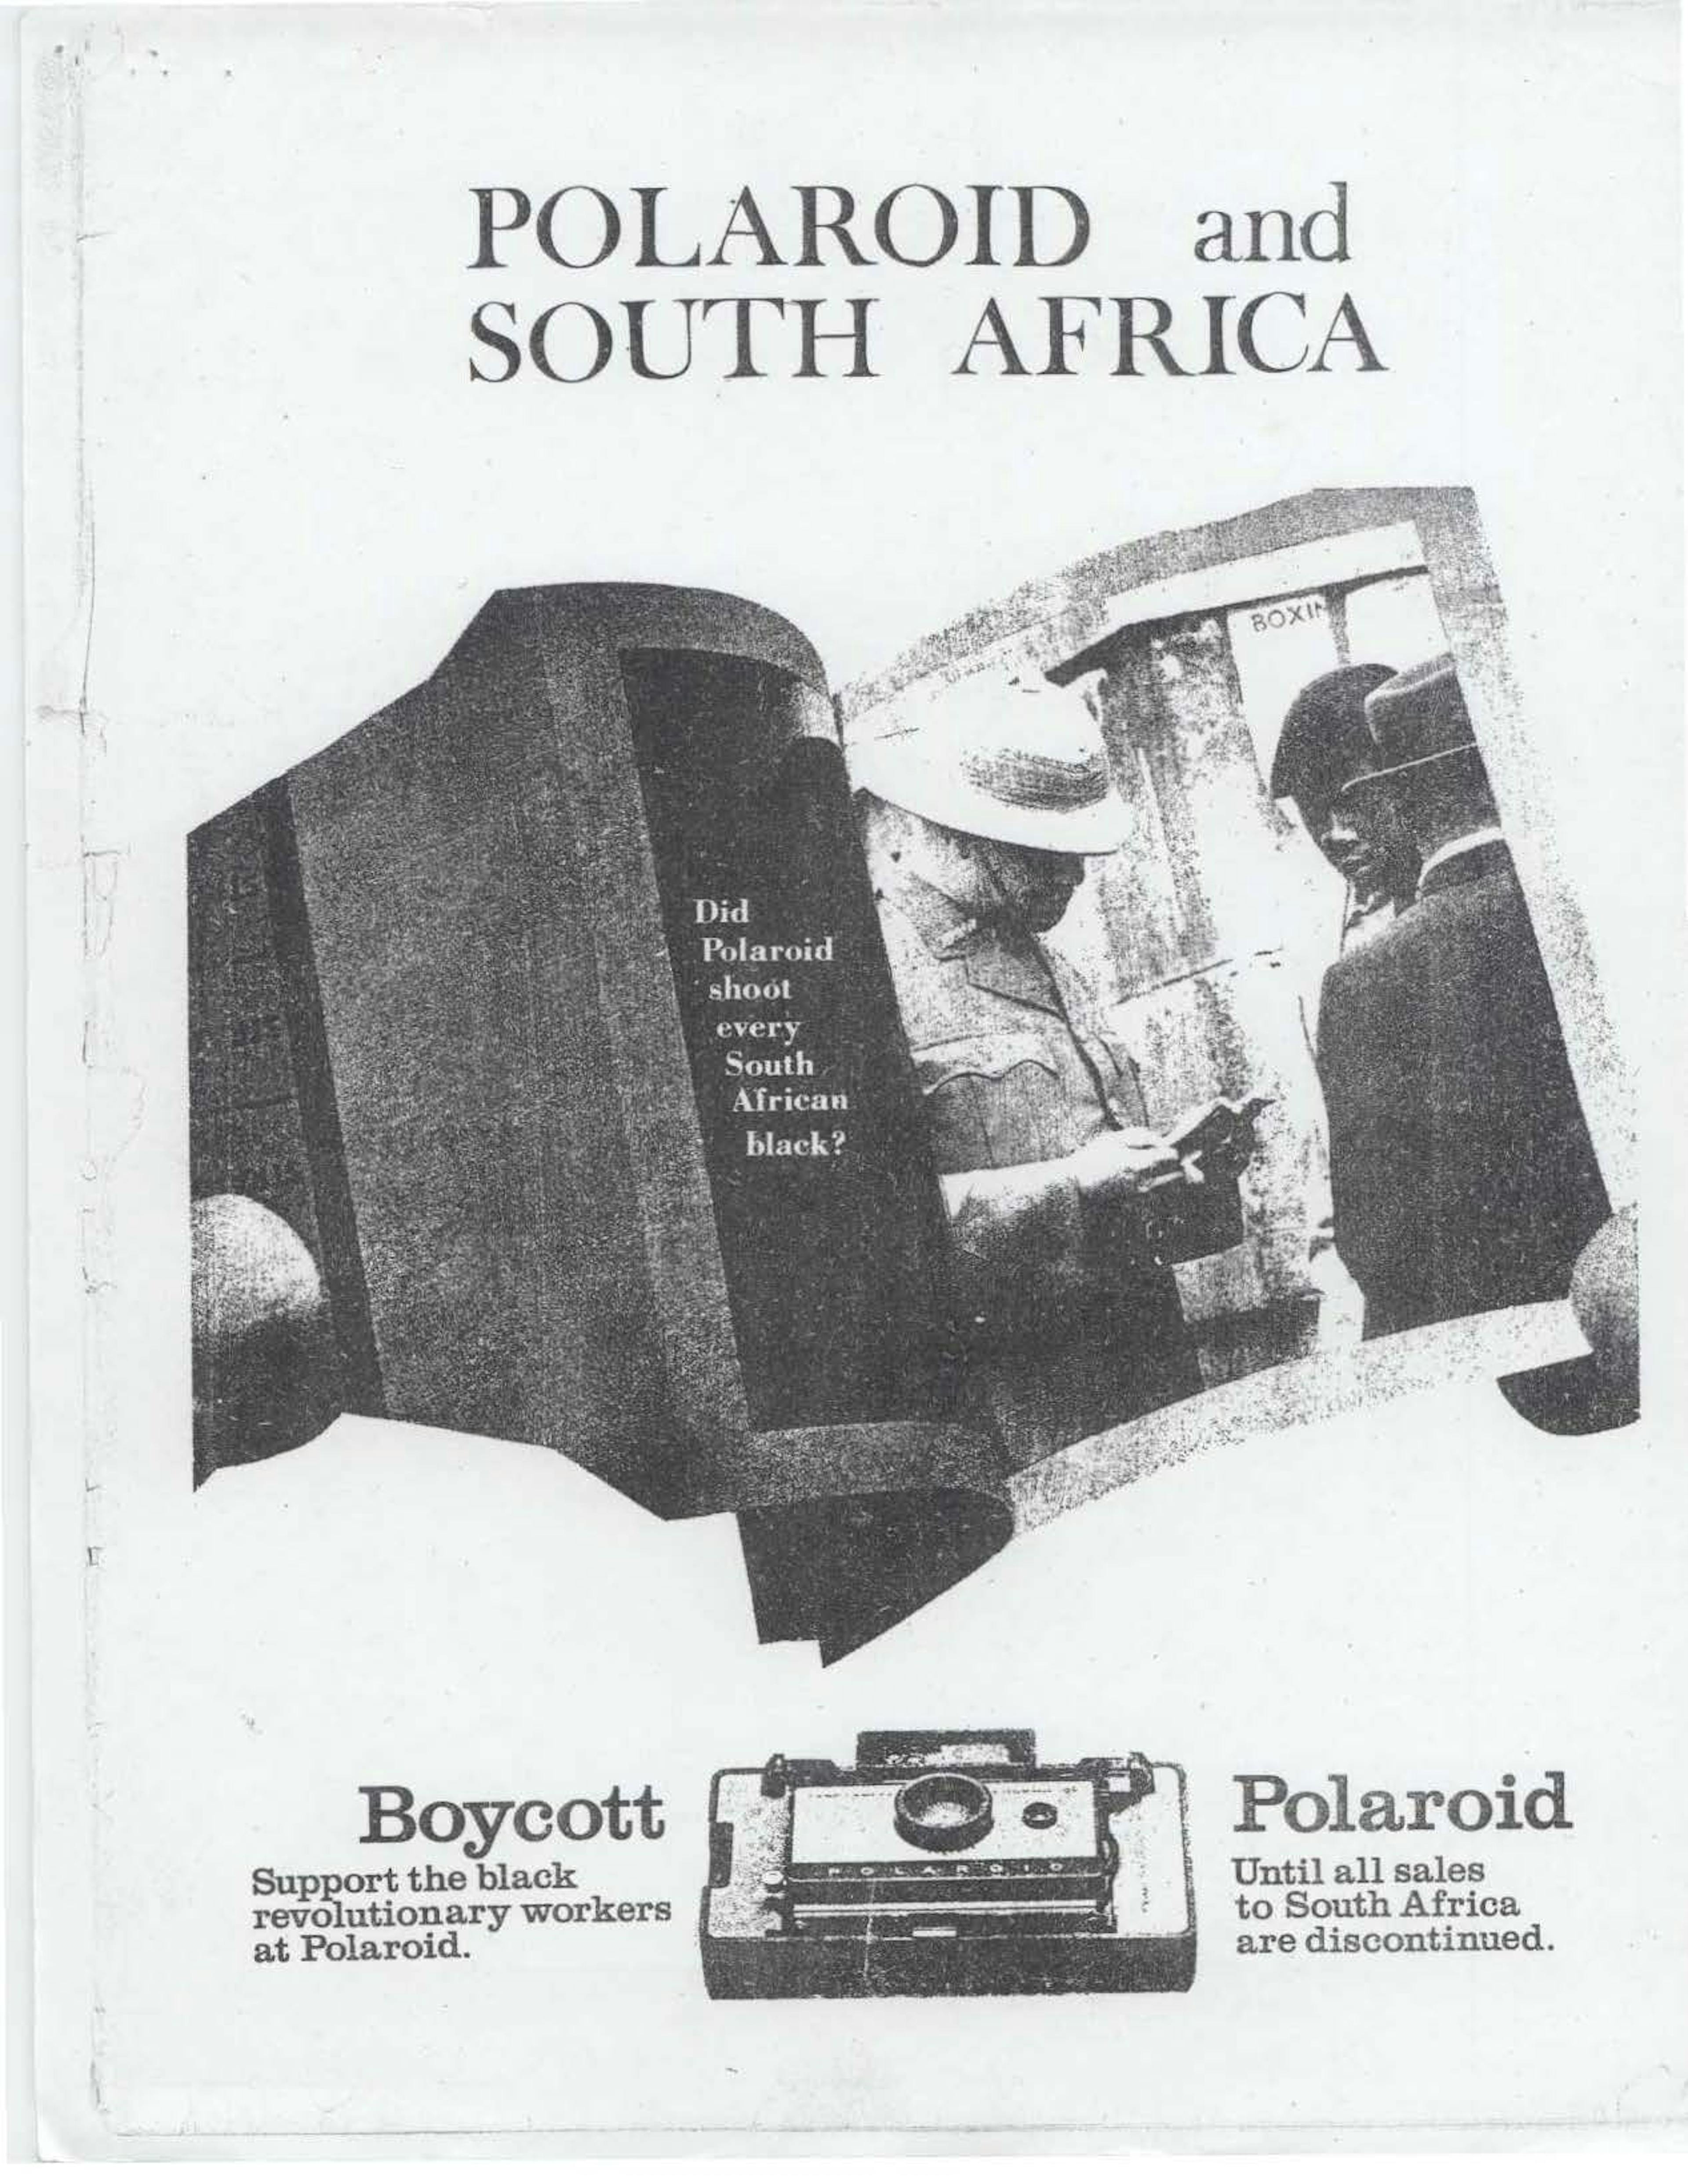 A flyer showing fingers pulling Polaroid's photographic film away from a picture that depicts a white police officer inspecting the passbooks of two black South Africans. Below the image are the words "Boycott Polaroid". ,